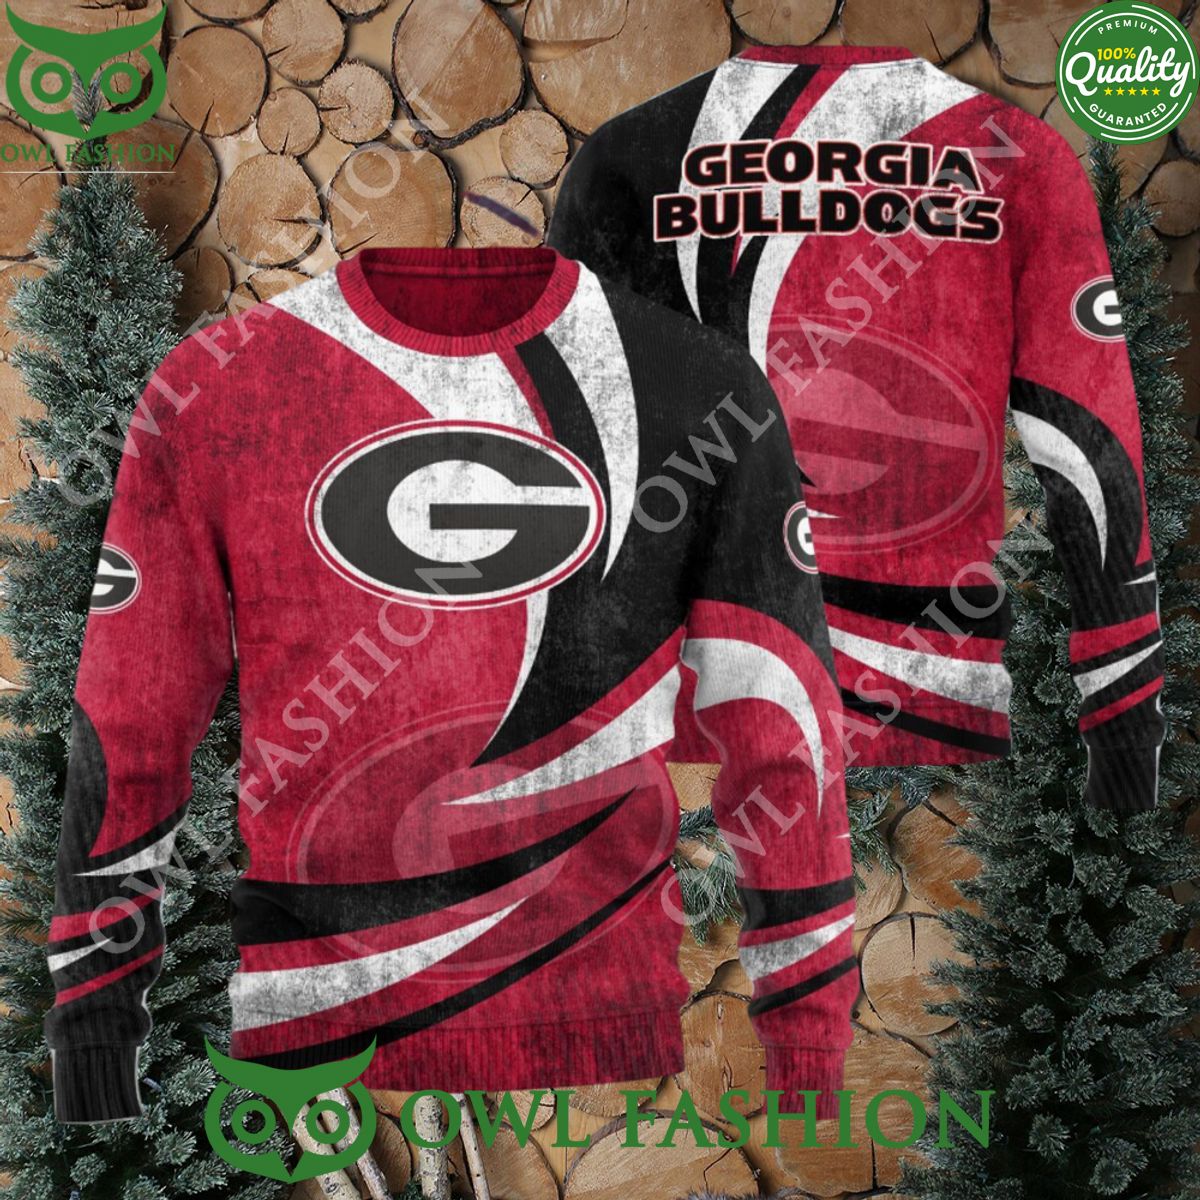 Georgia Bulldogs NCAA Hot Style Knitted Christmas Sweater Jumper